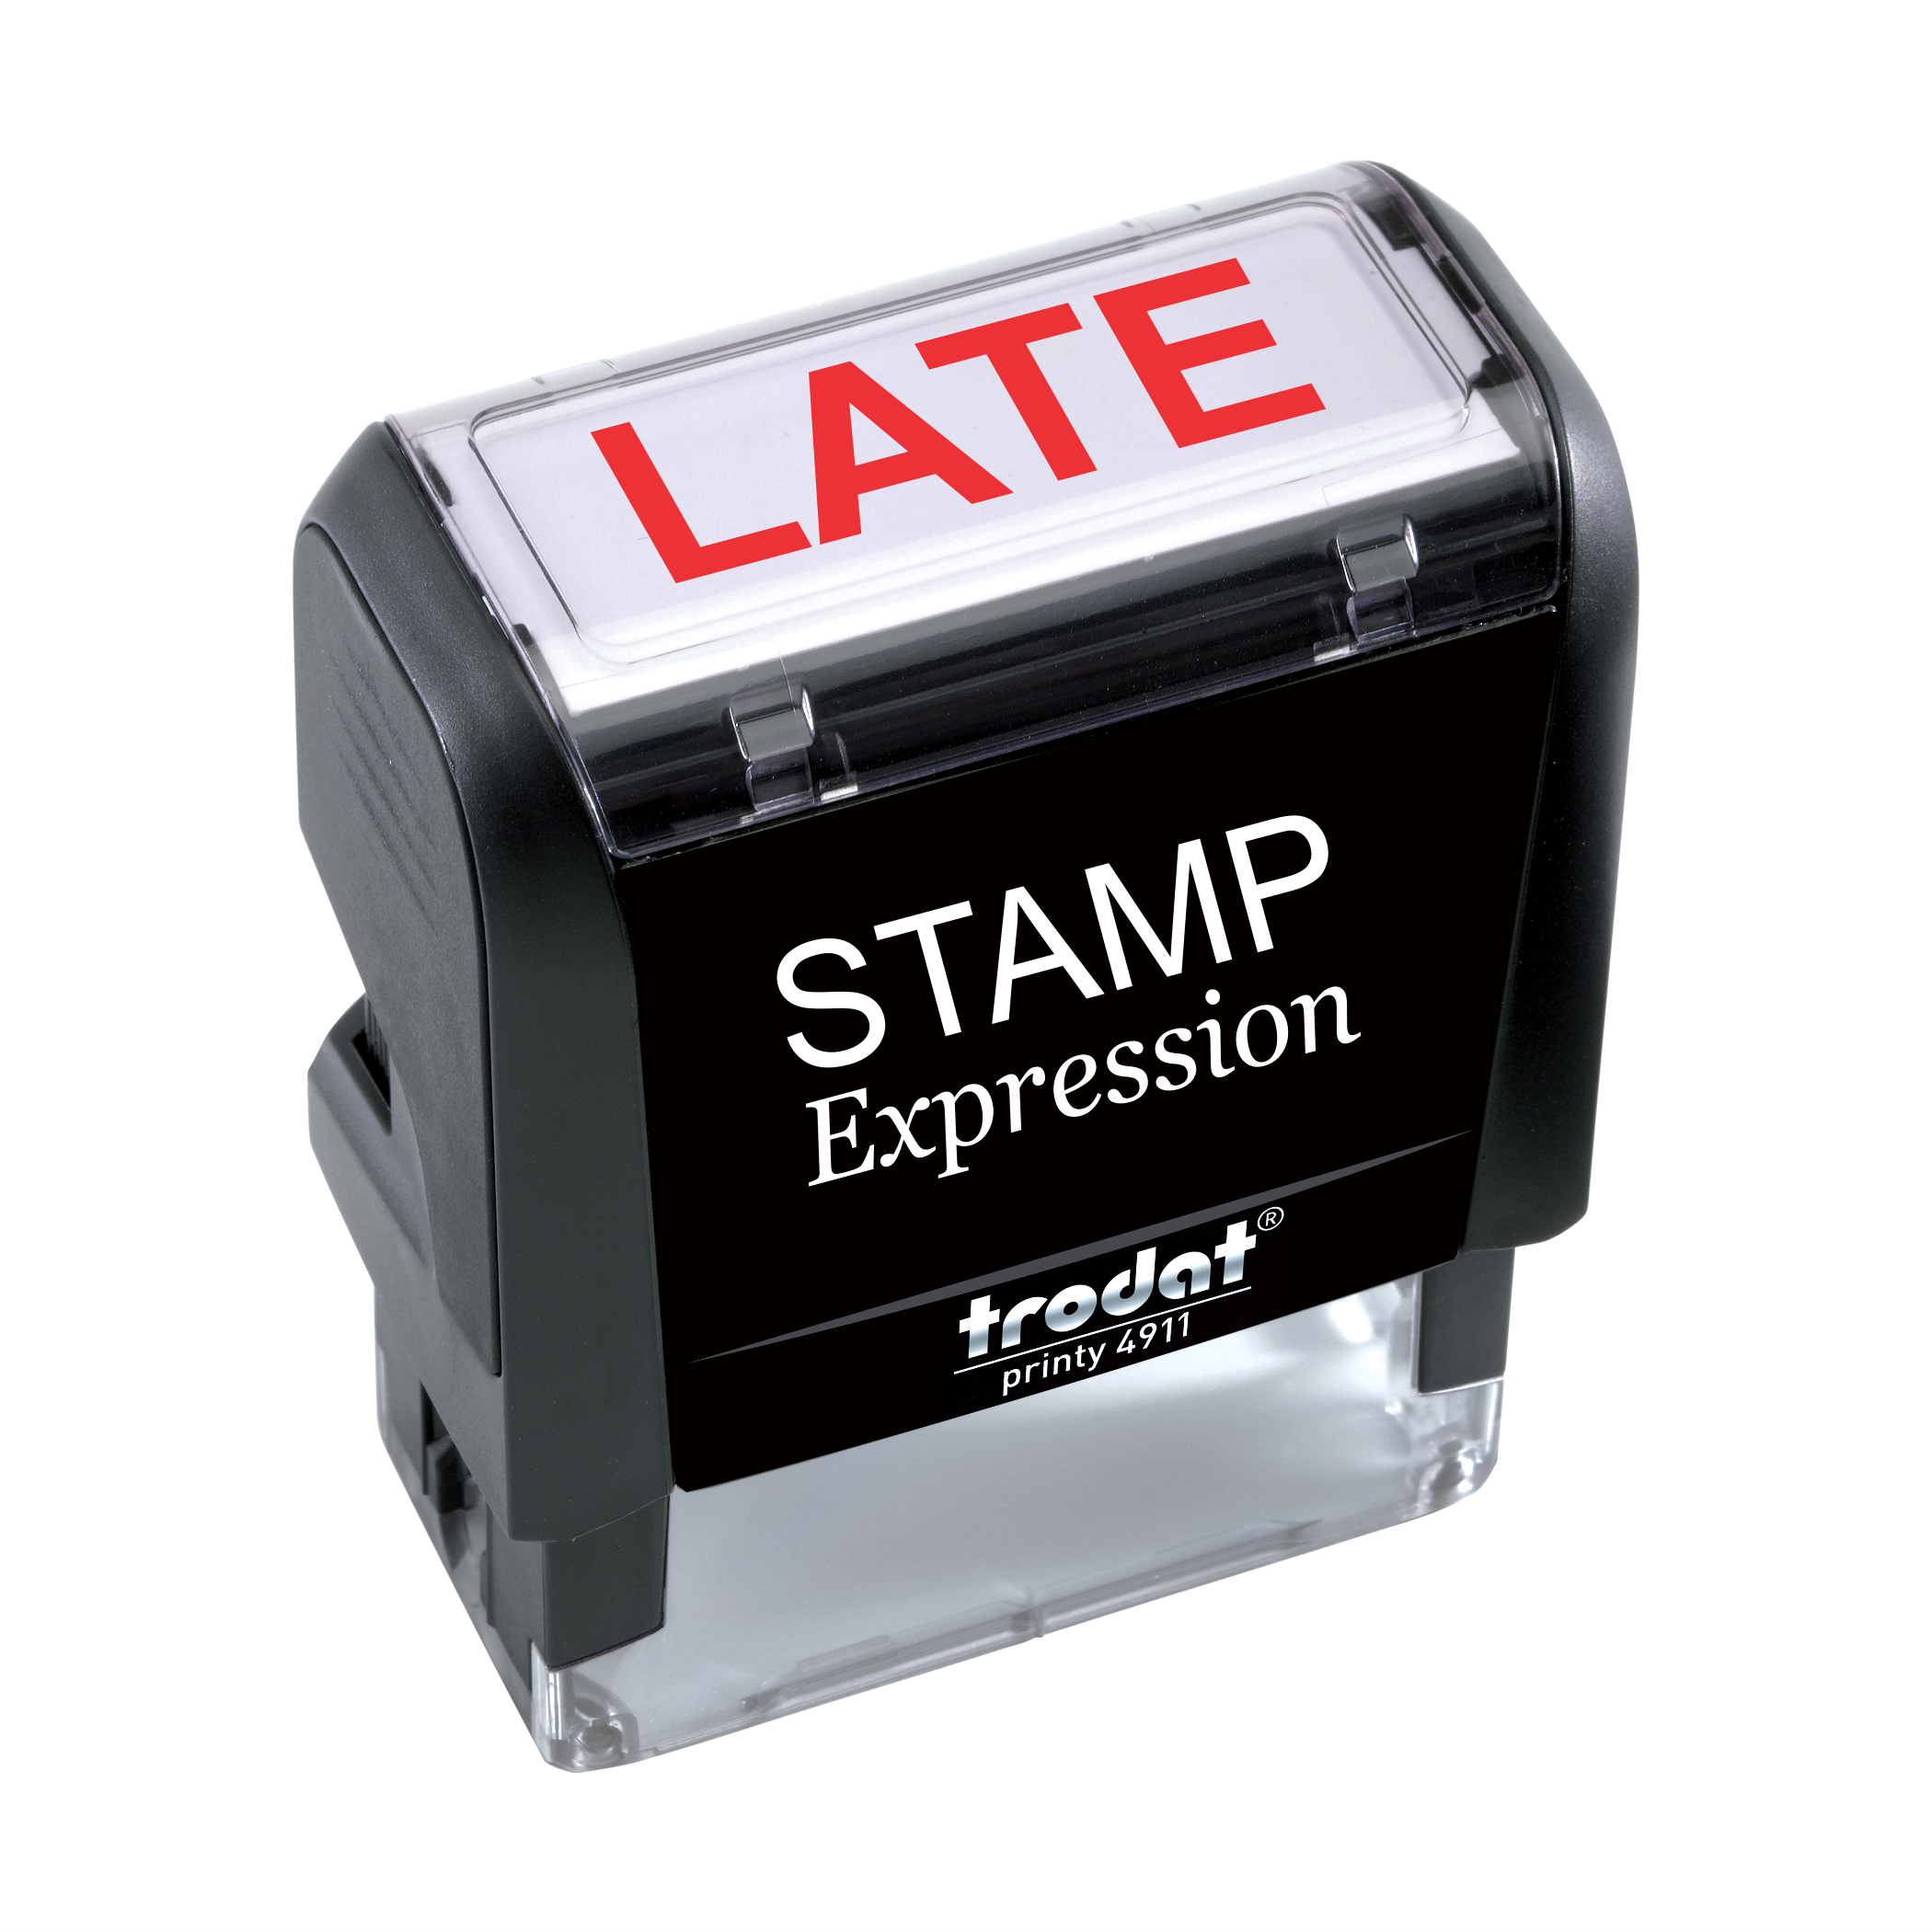 Late Office Self Inking Rubber Stamp